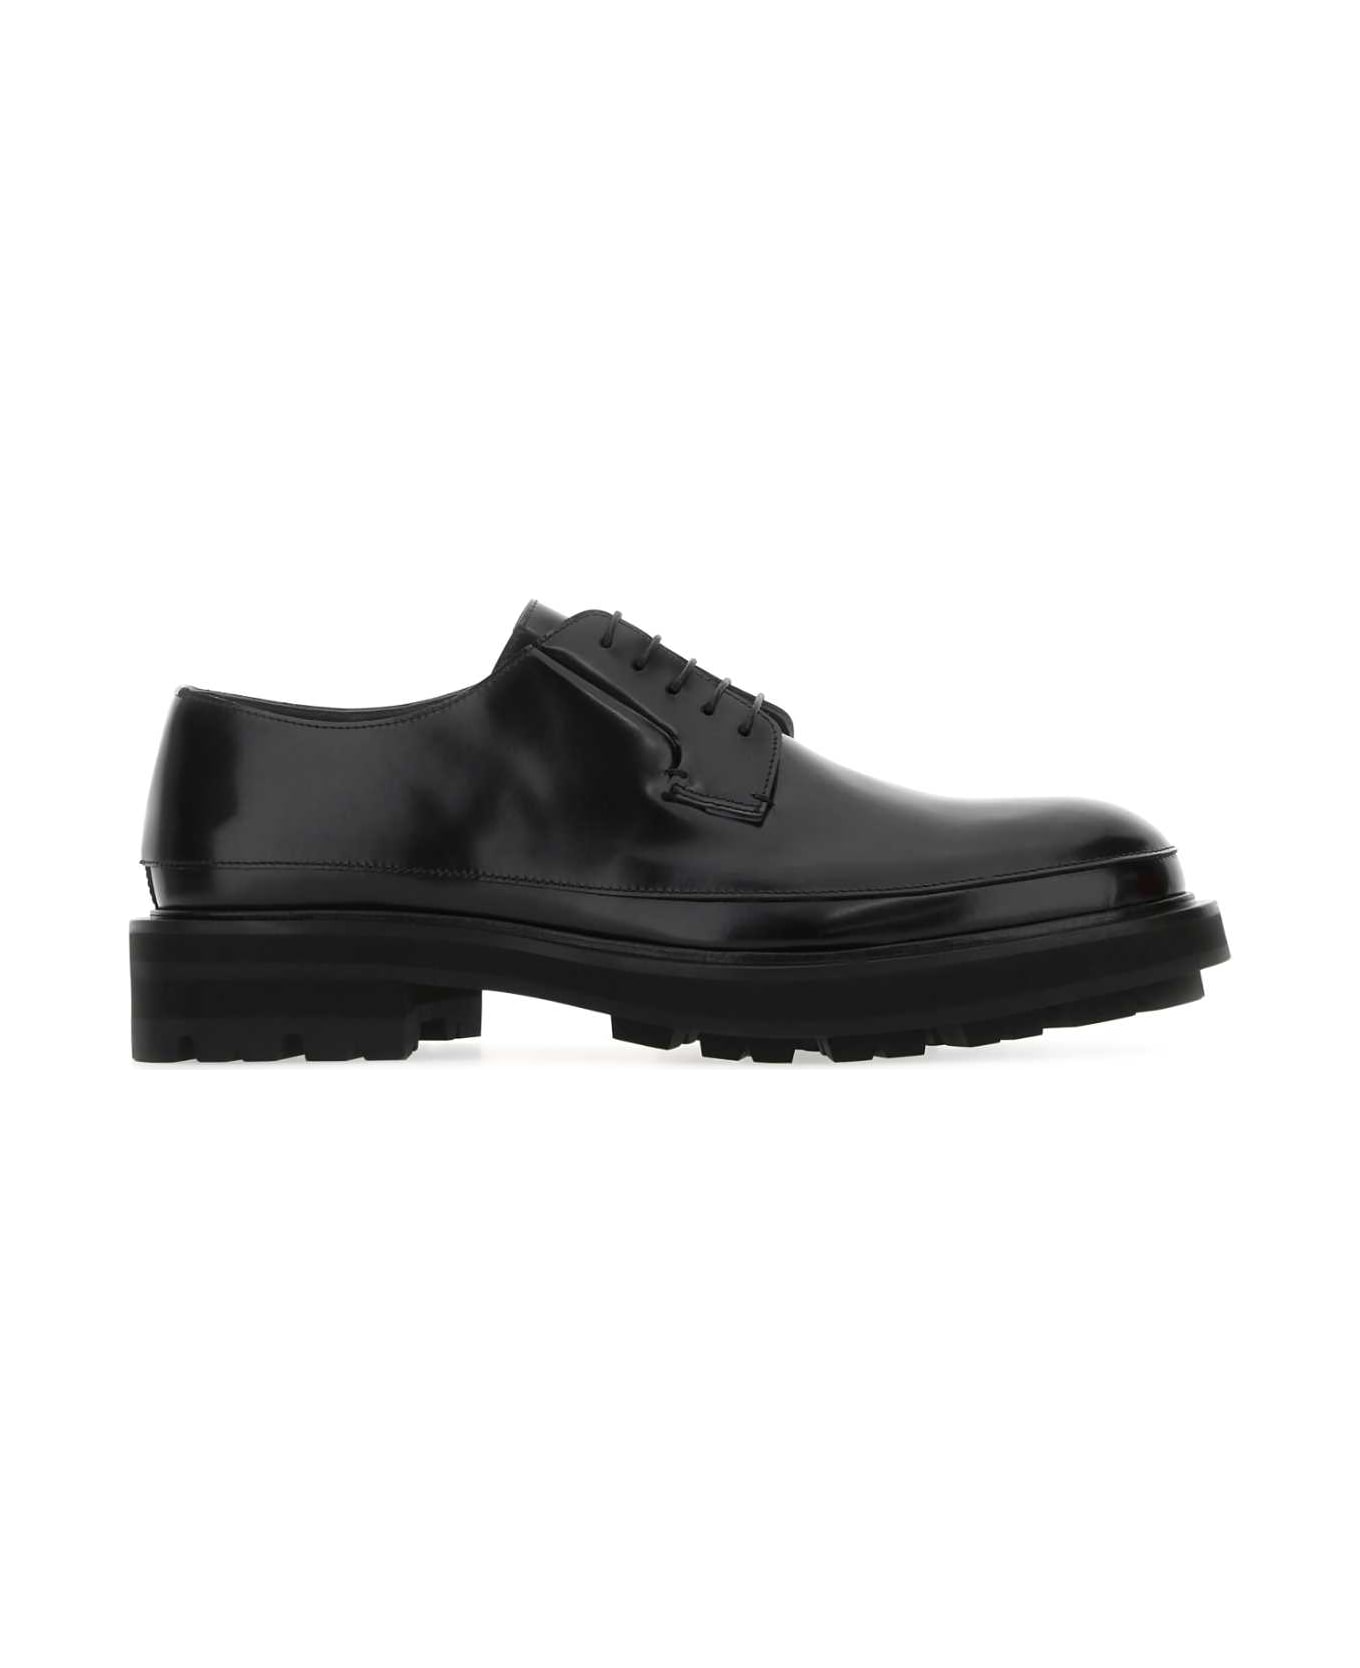 Alexander McQueen Black Leather Lace-up Shoes - 1000